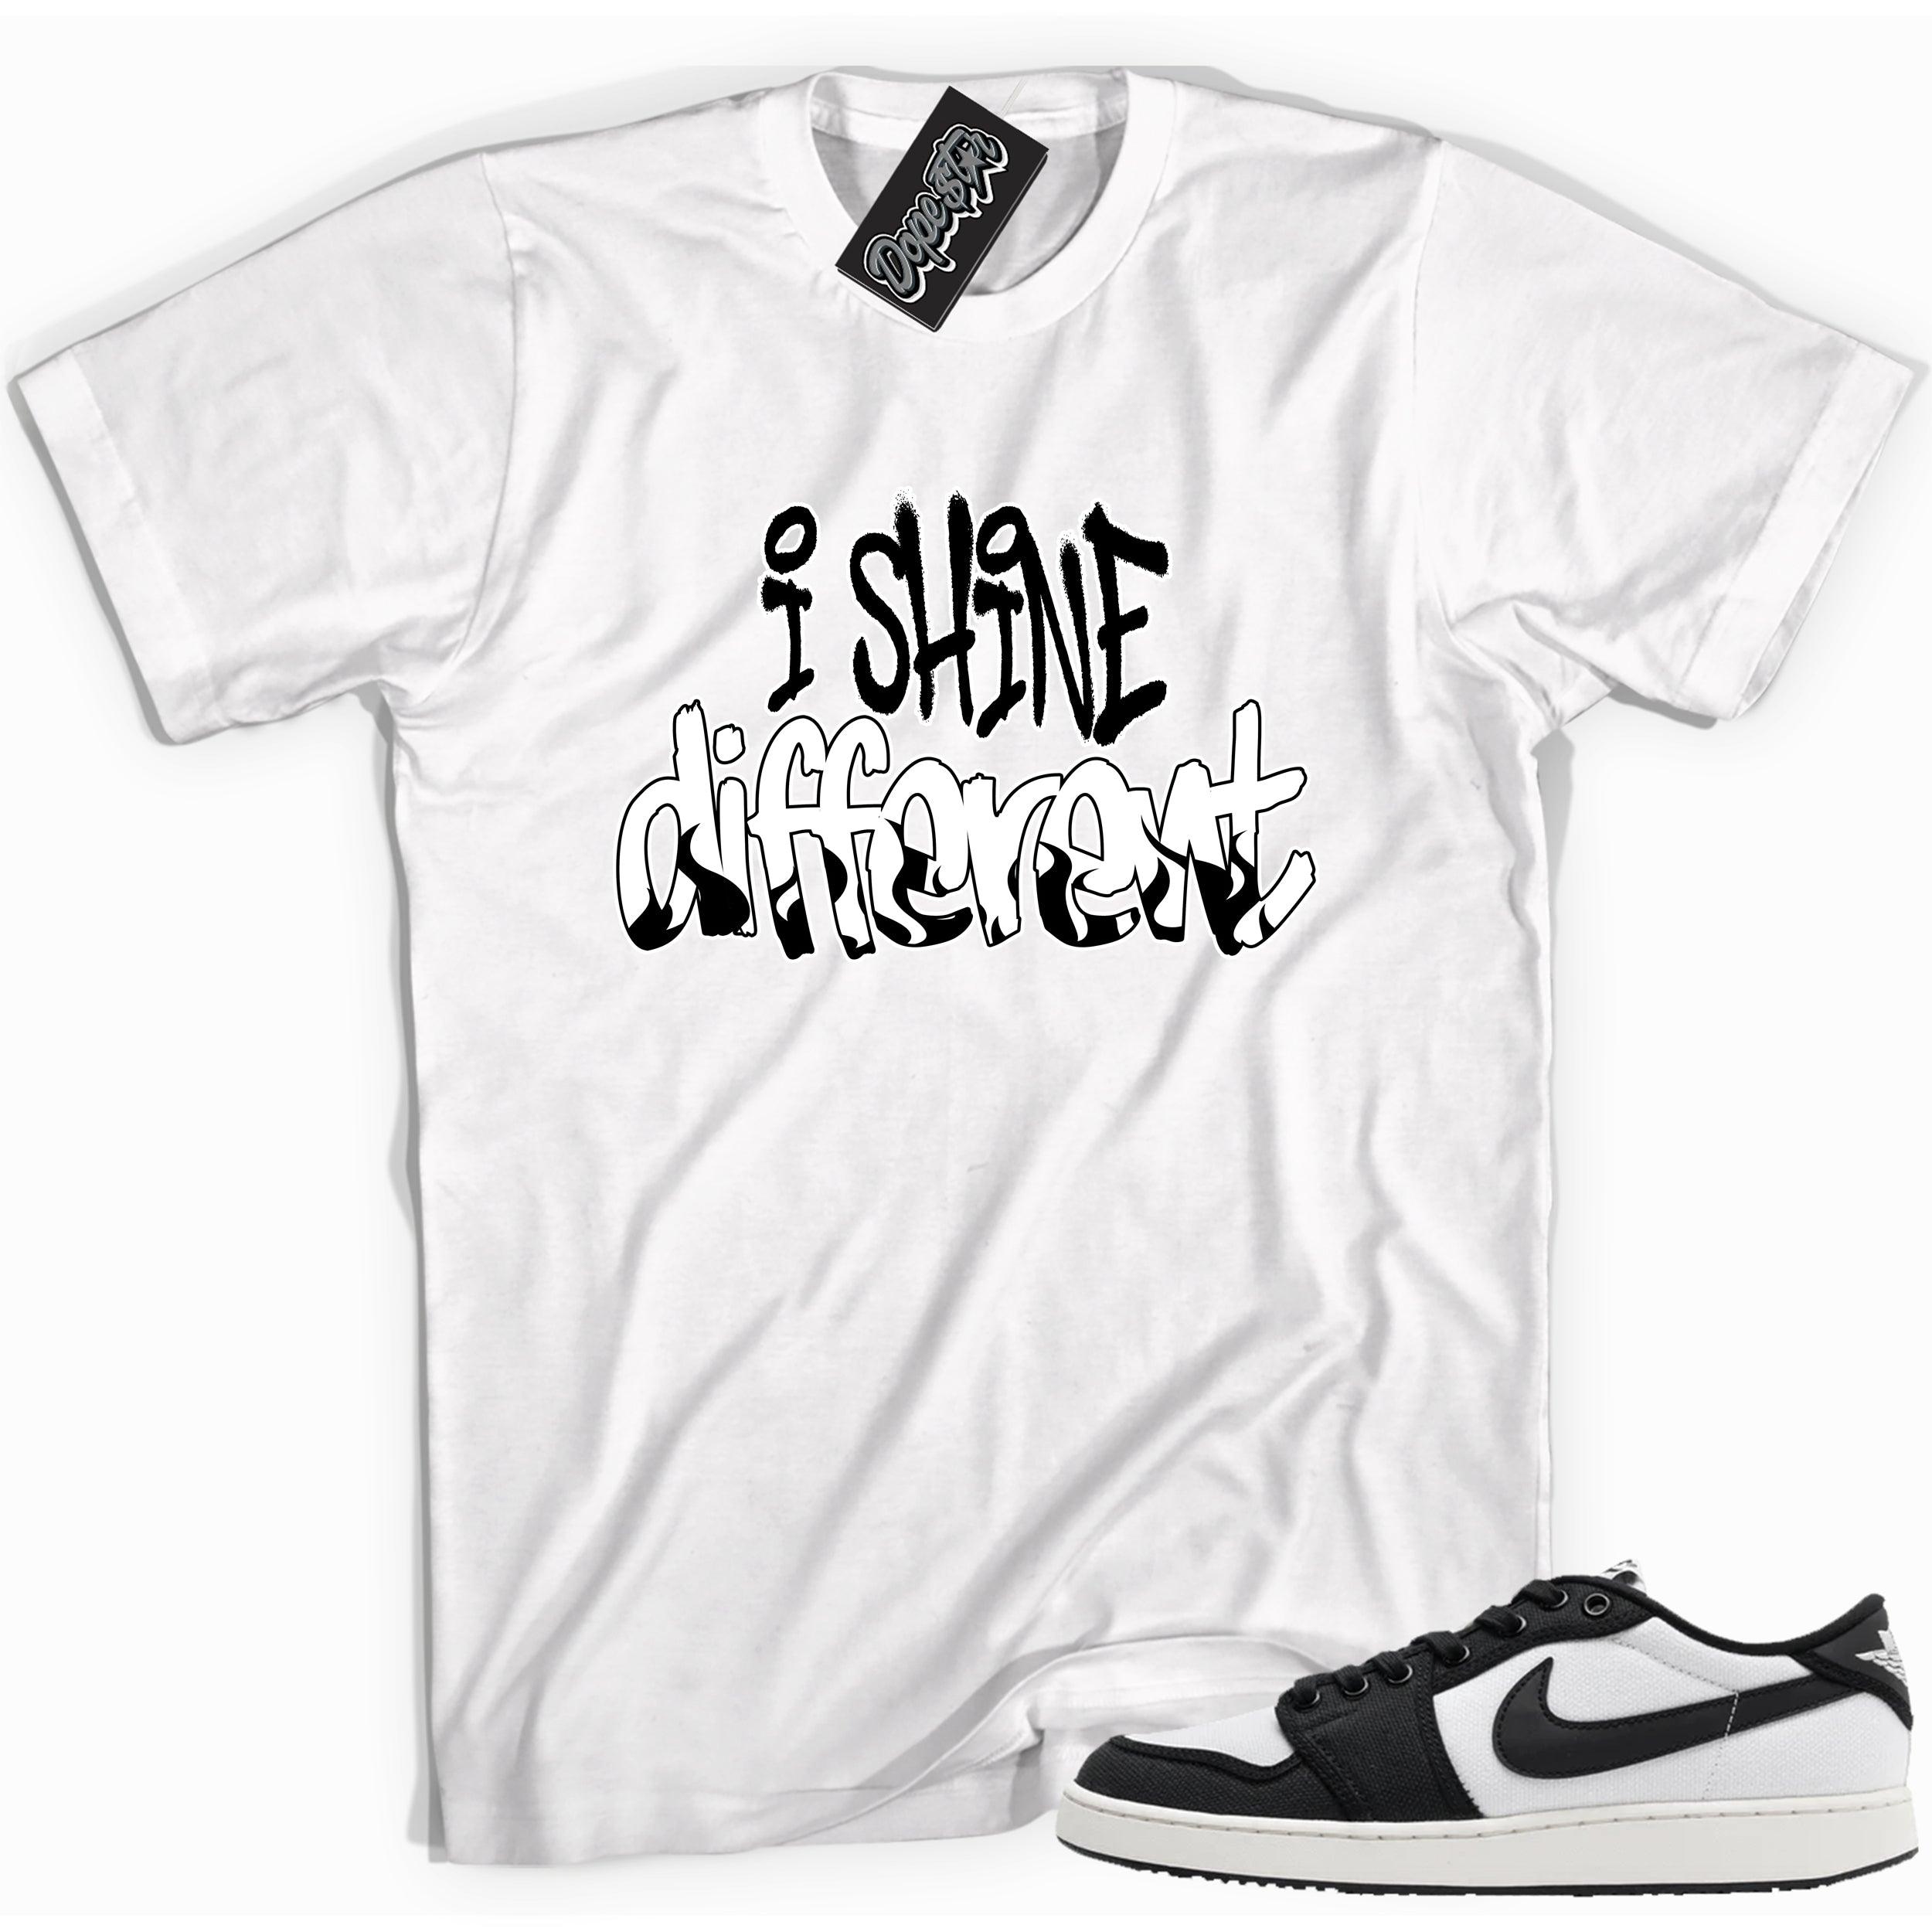 Cool white graphic tee with 'i shine different' print, that perfectly matches Air Jordan 1 Retro Ajko Low Black & White sneakers.